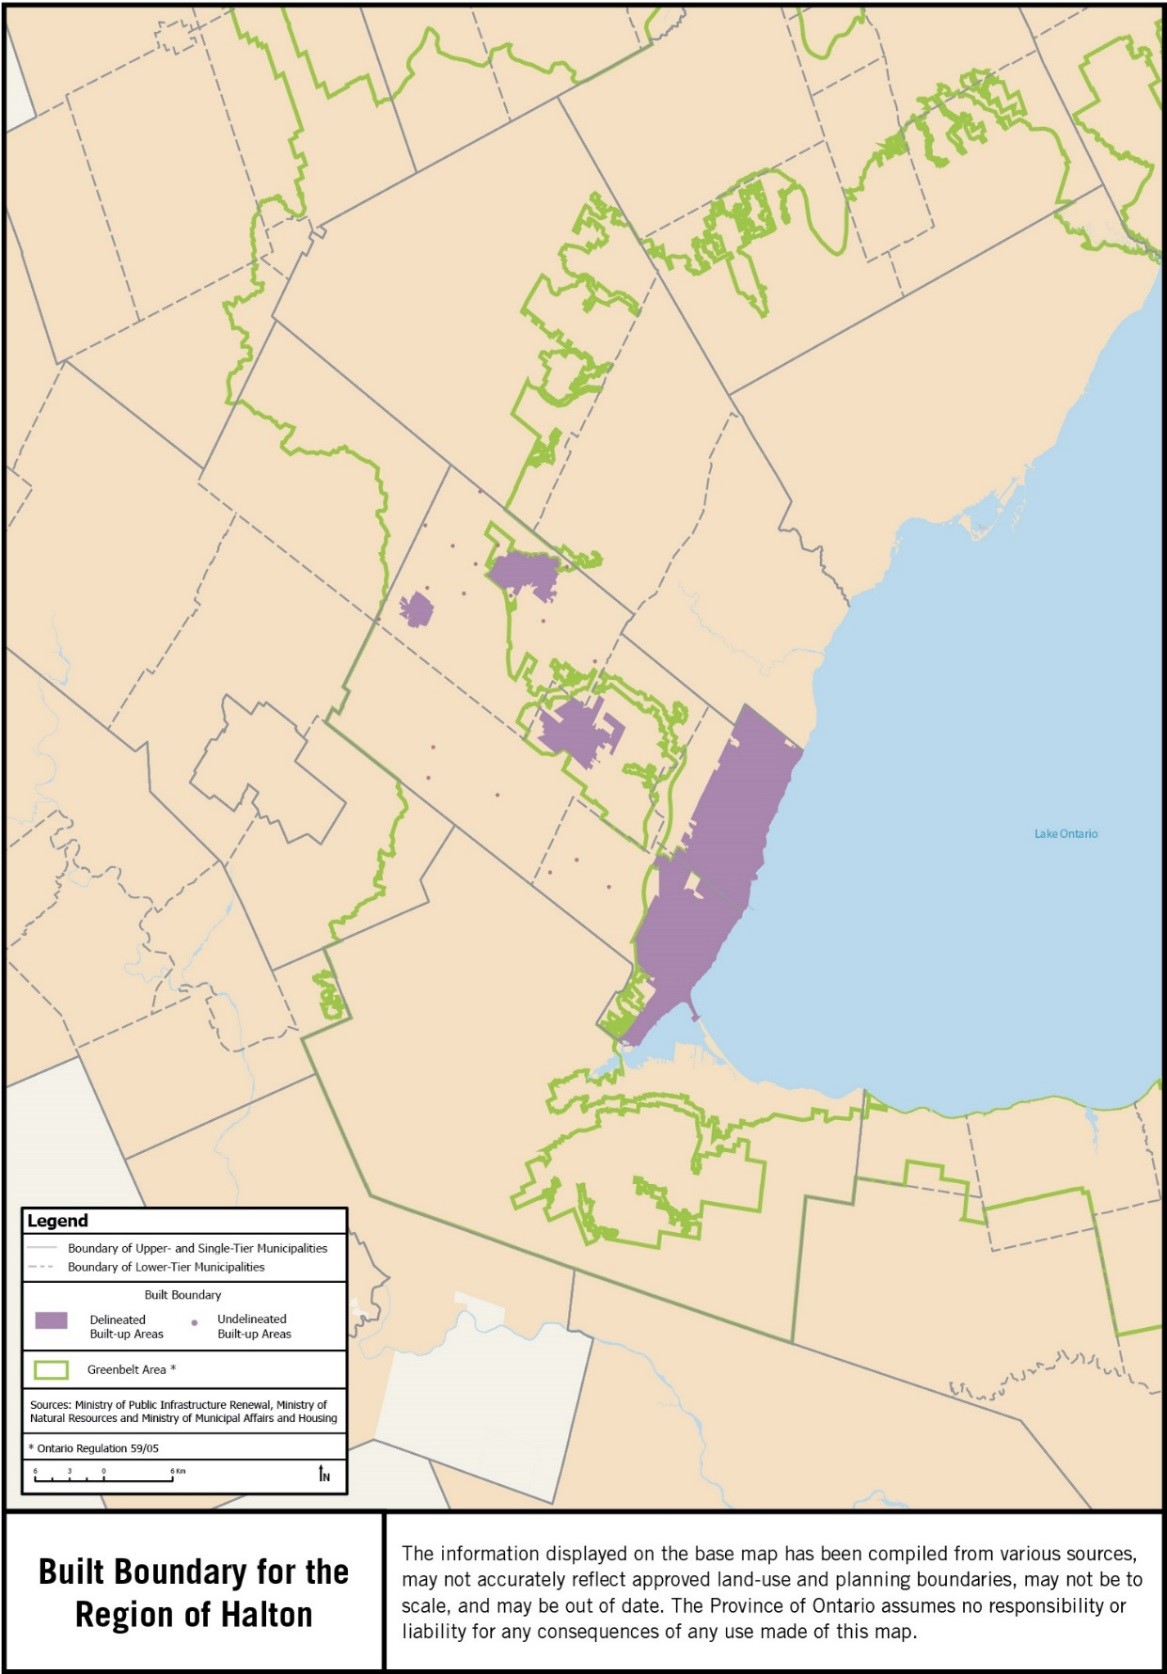 Map showing the built boundary for the Region of Halton.